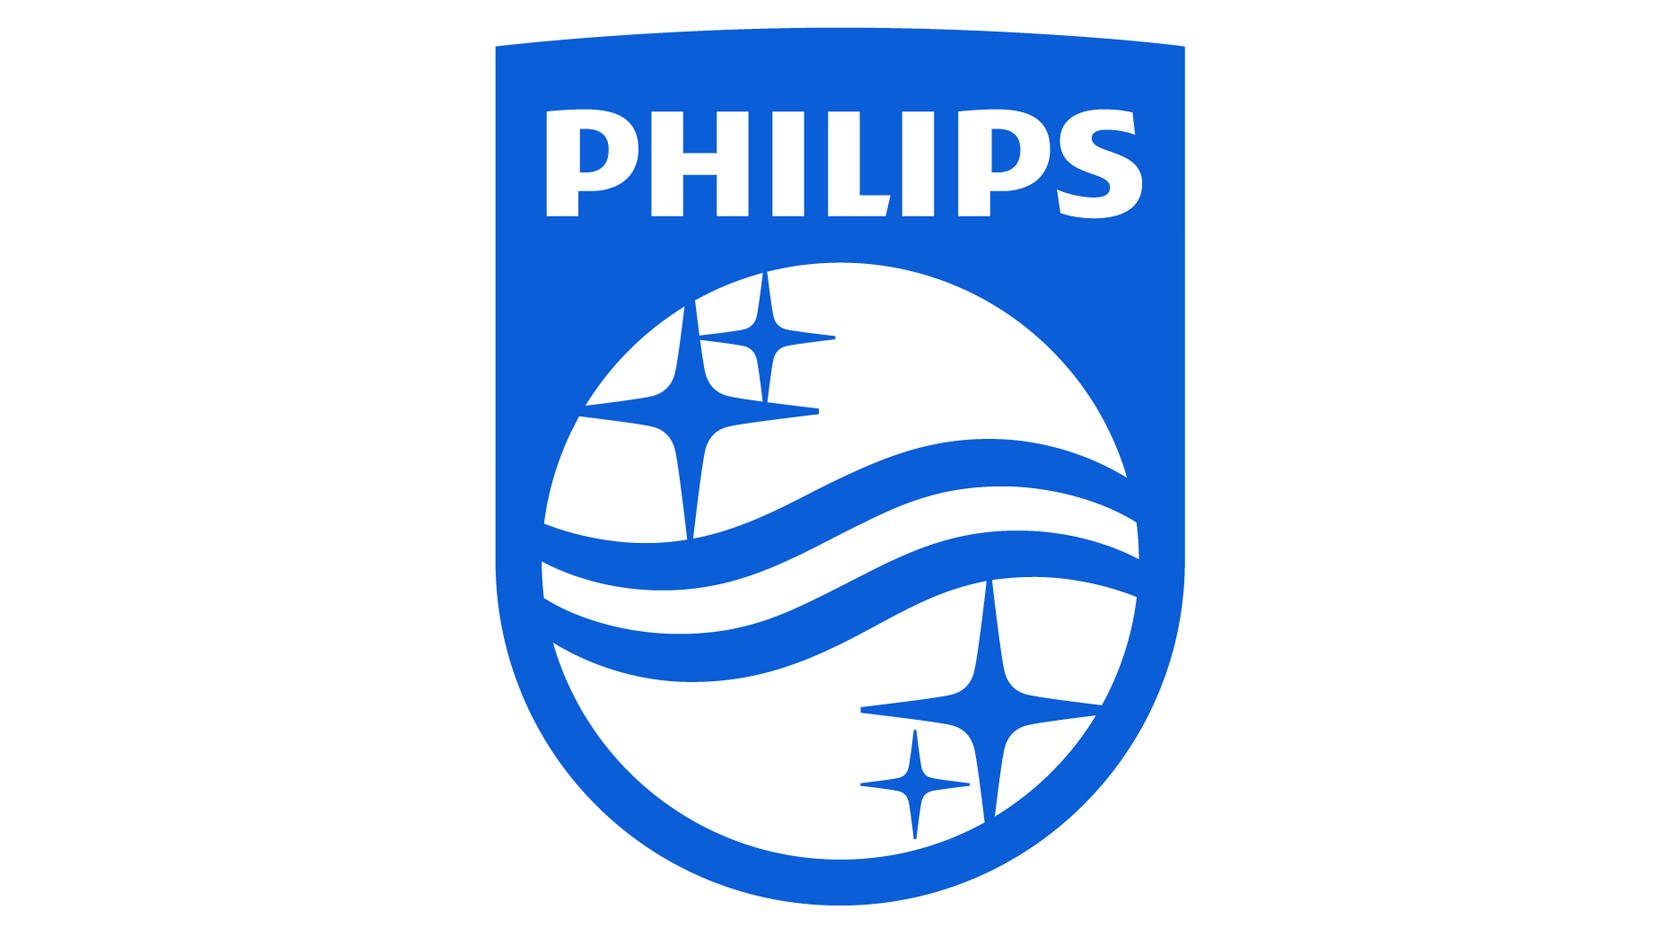 Philips is the new client of Wieden+Kennedy